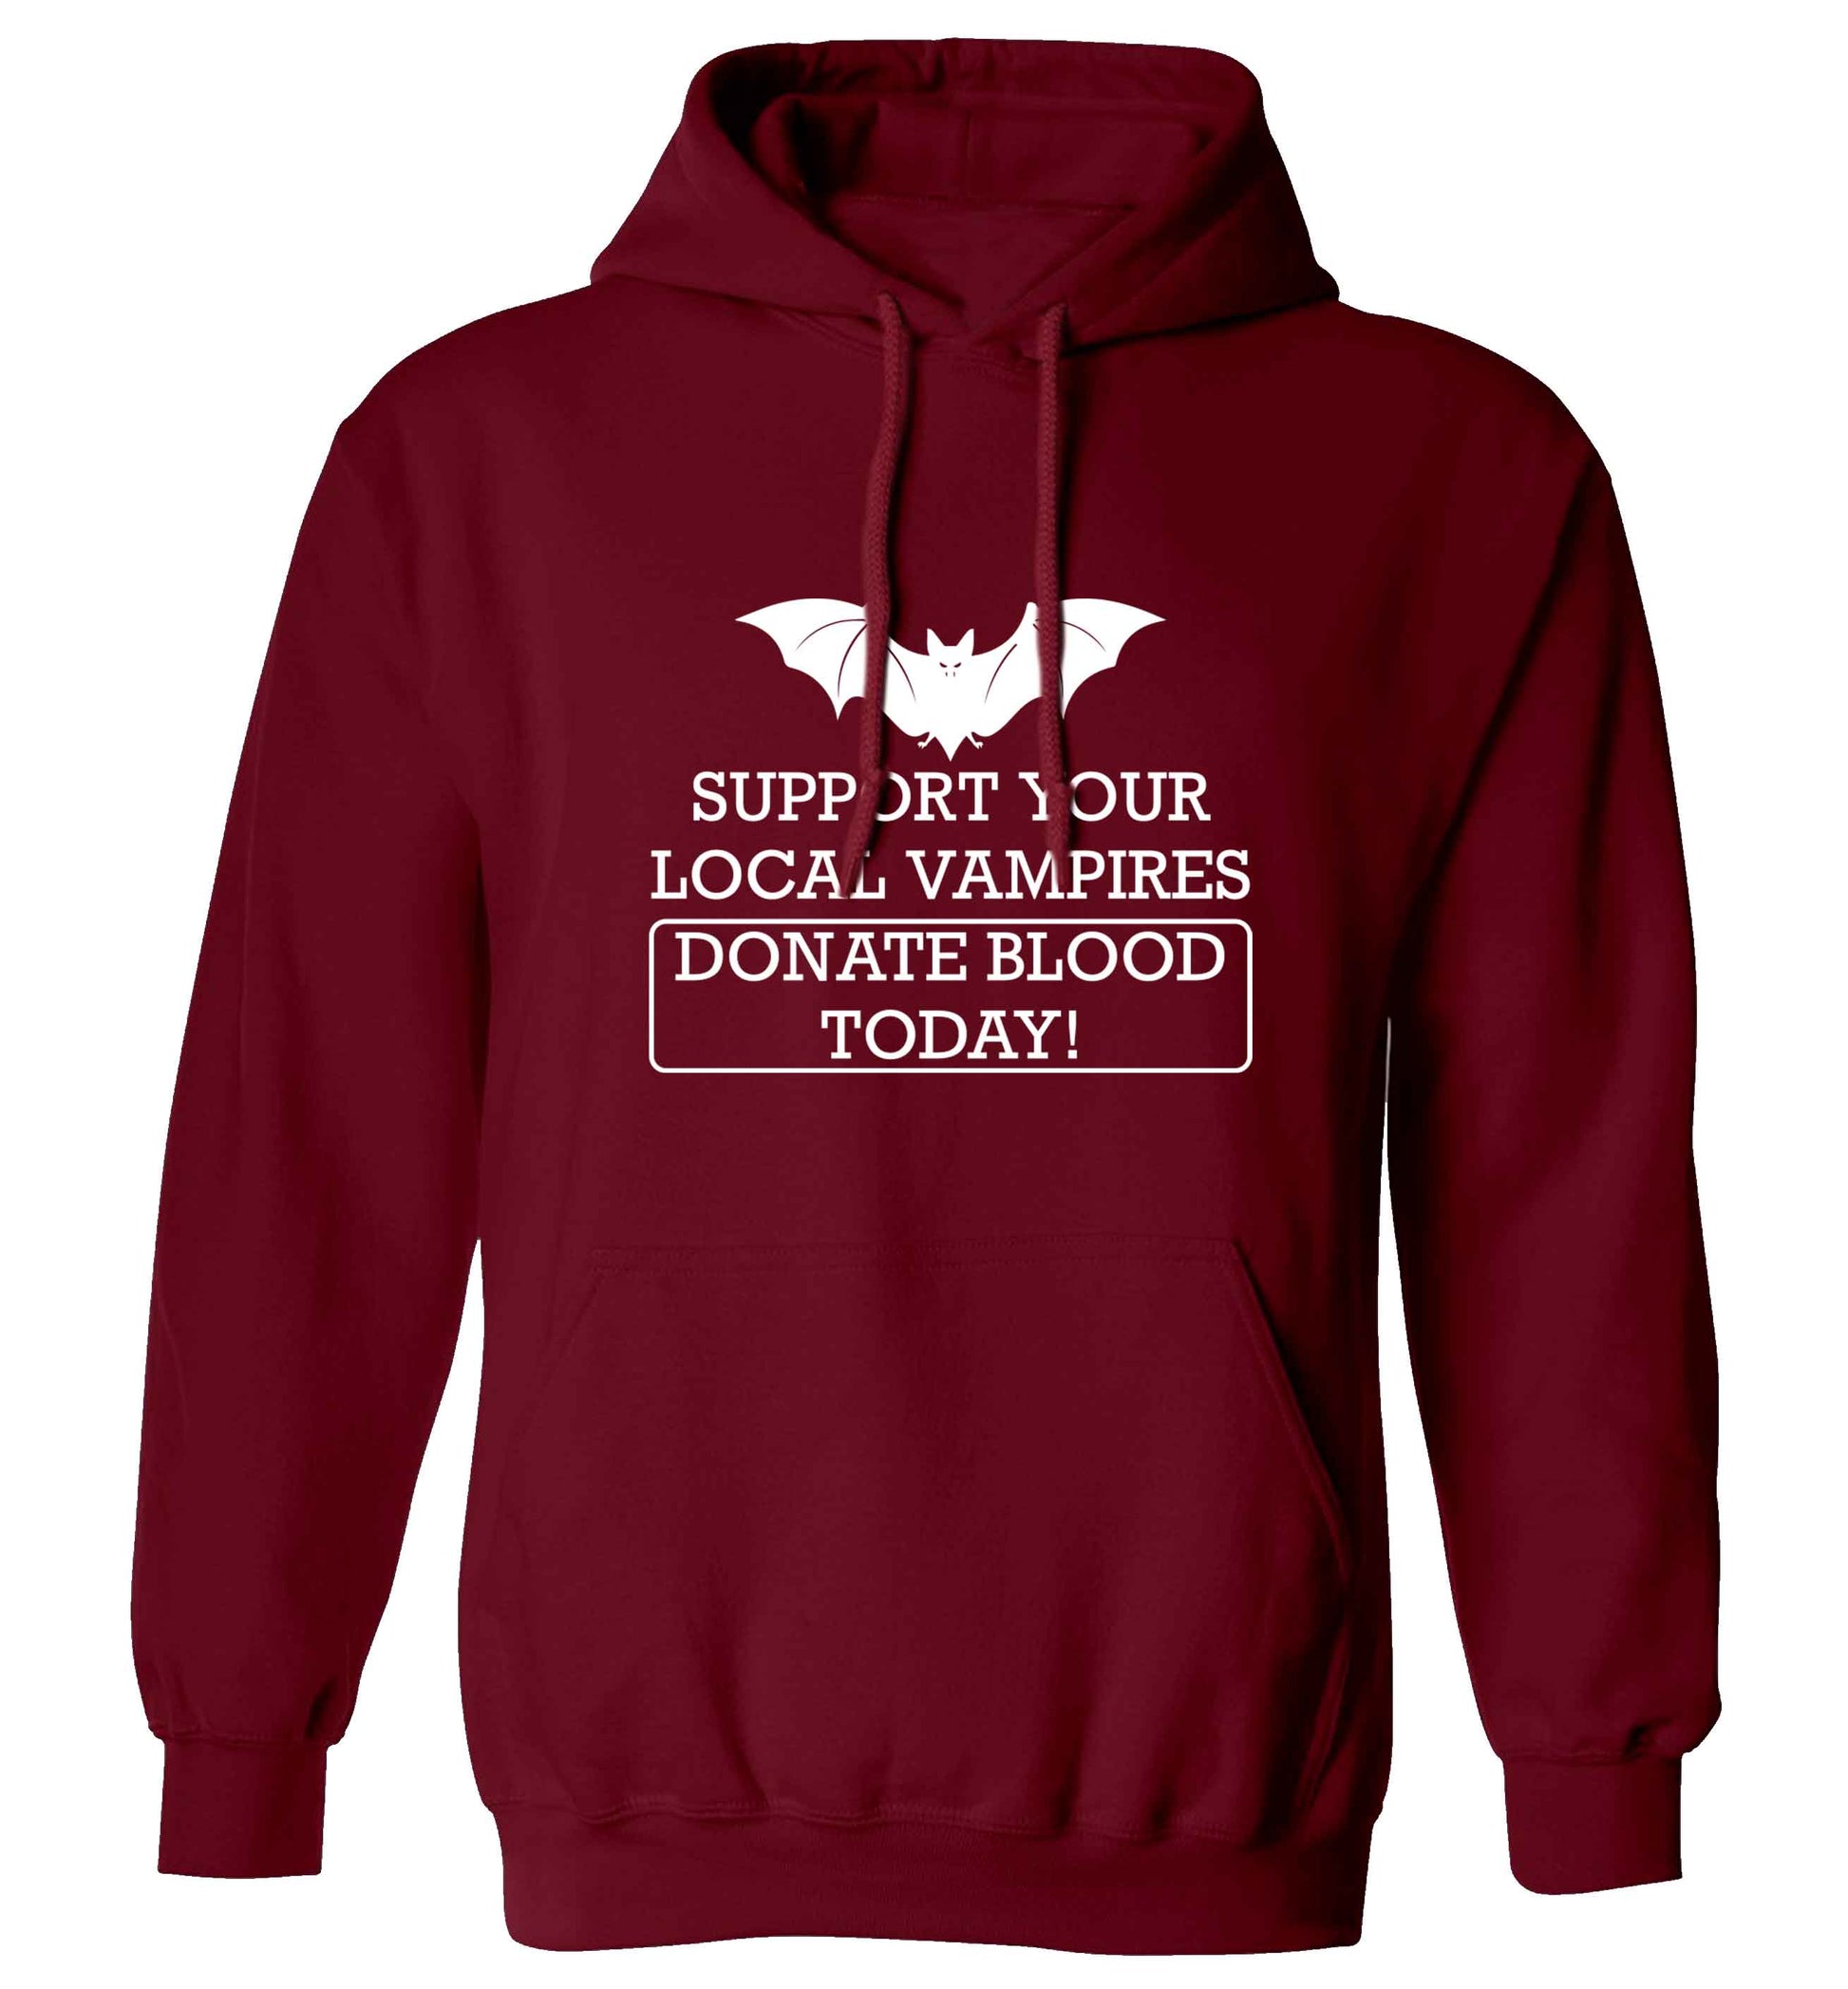 Support your local vampires donate blood today! adults unisex maroon hoodie 2XL